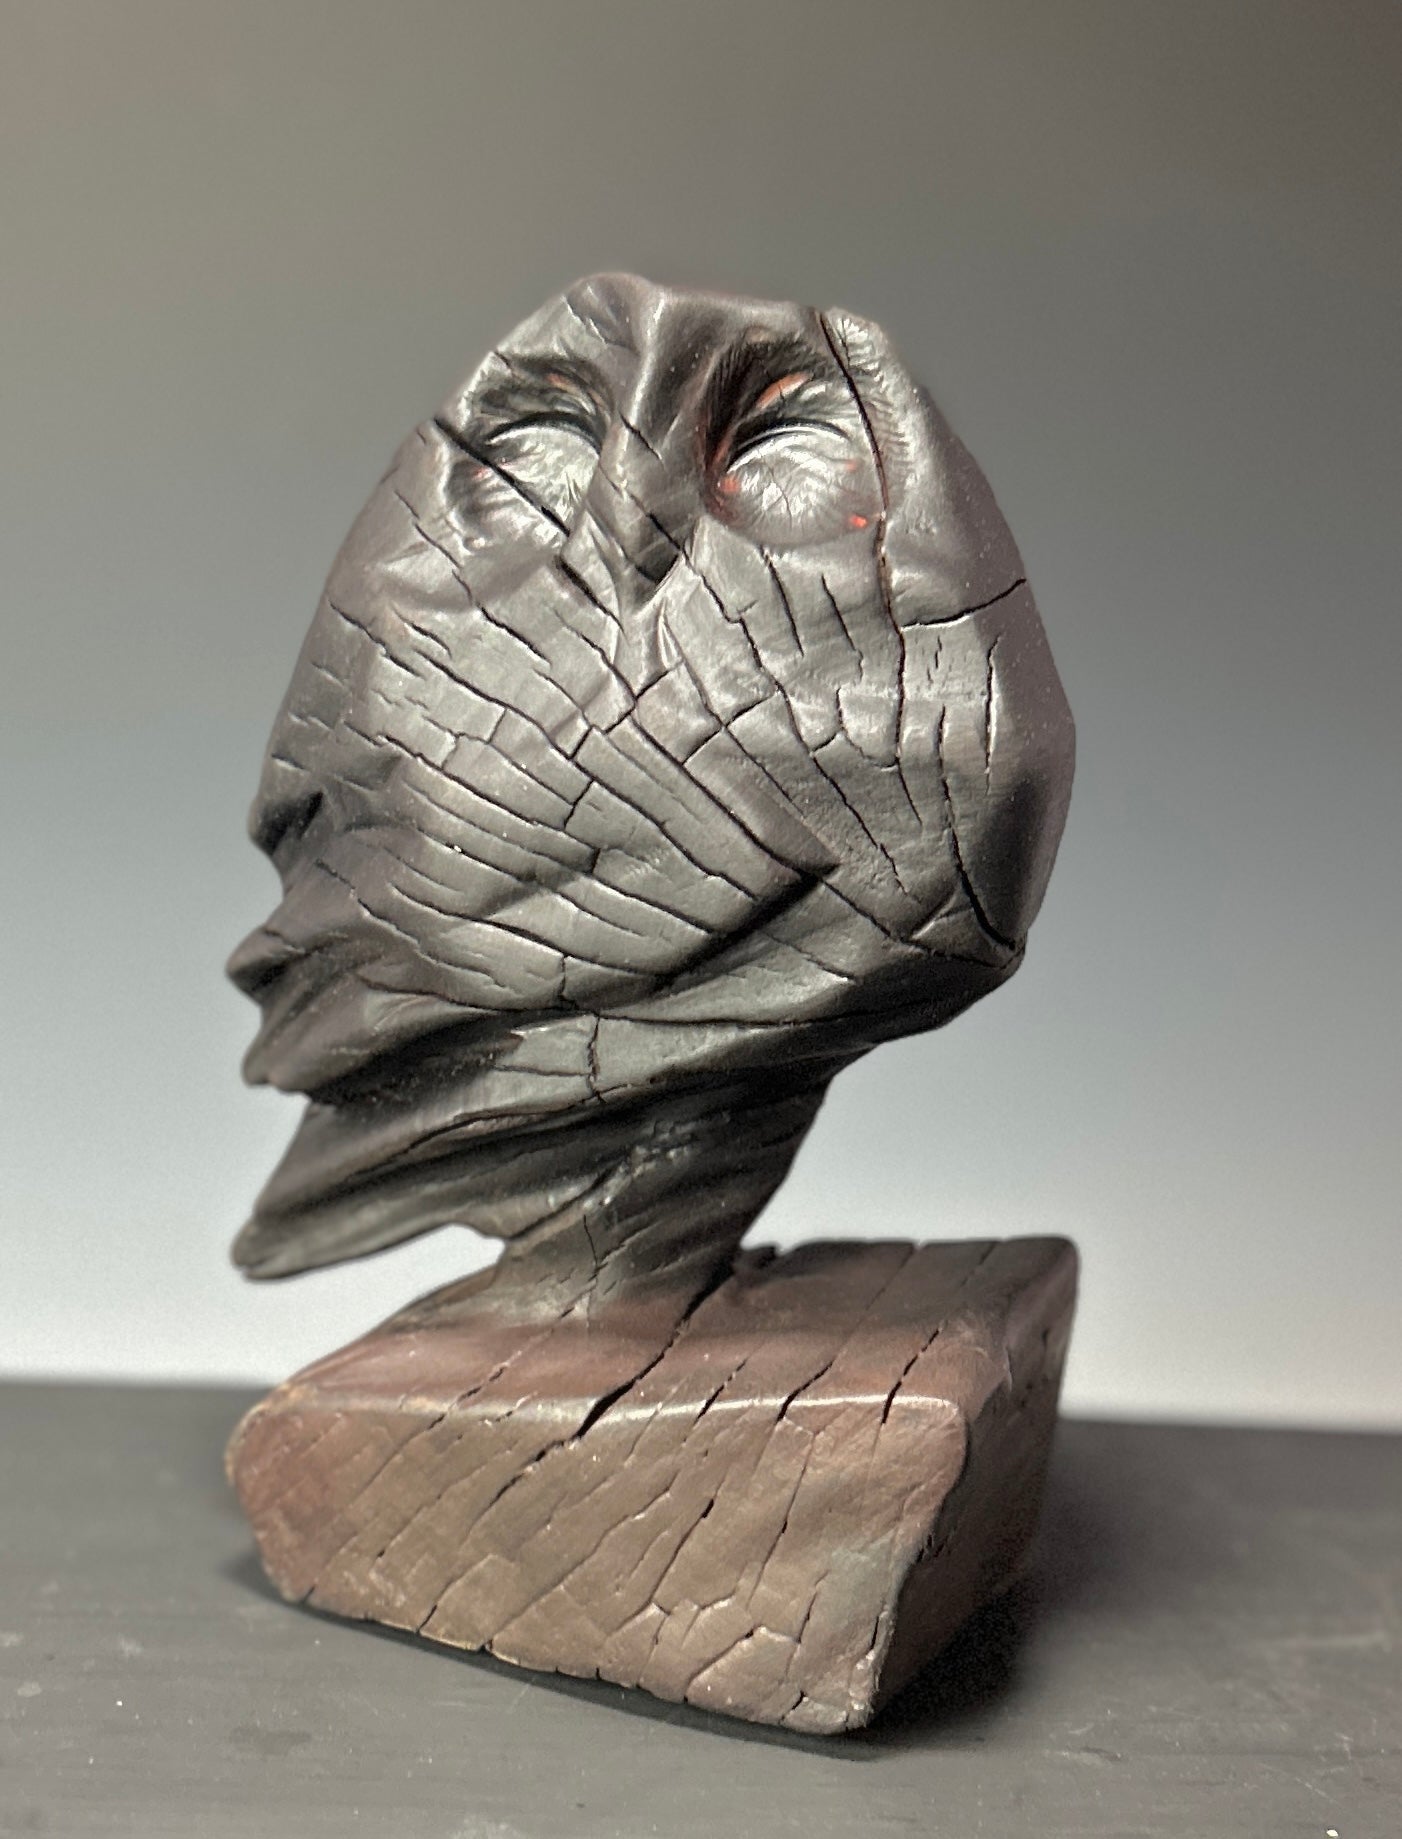 "CRACKS OF RESILIENCE OWL"  CARVED WOOD SCULPTURE